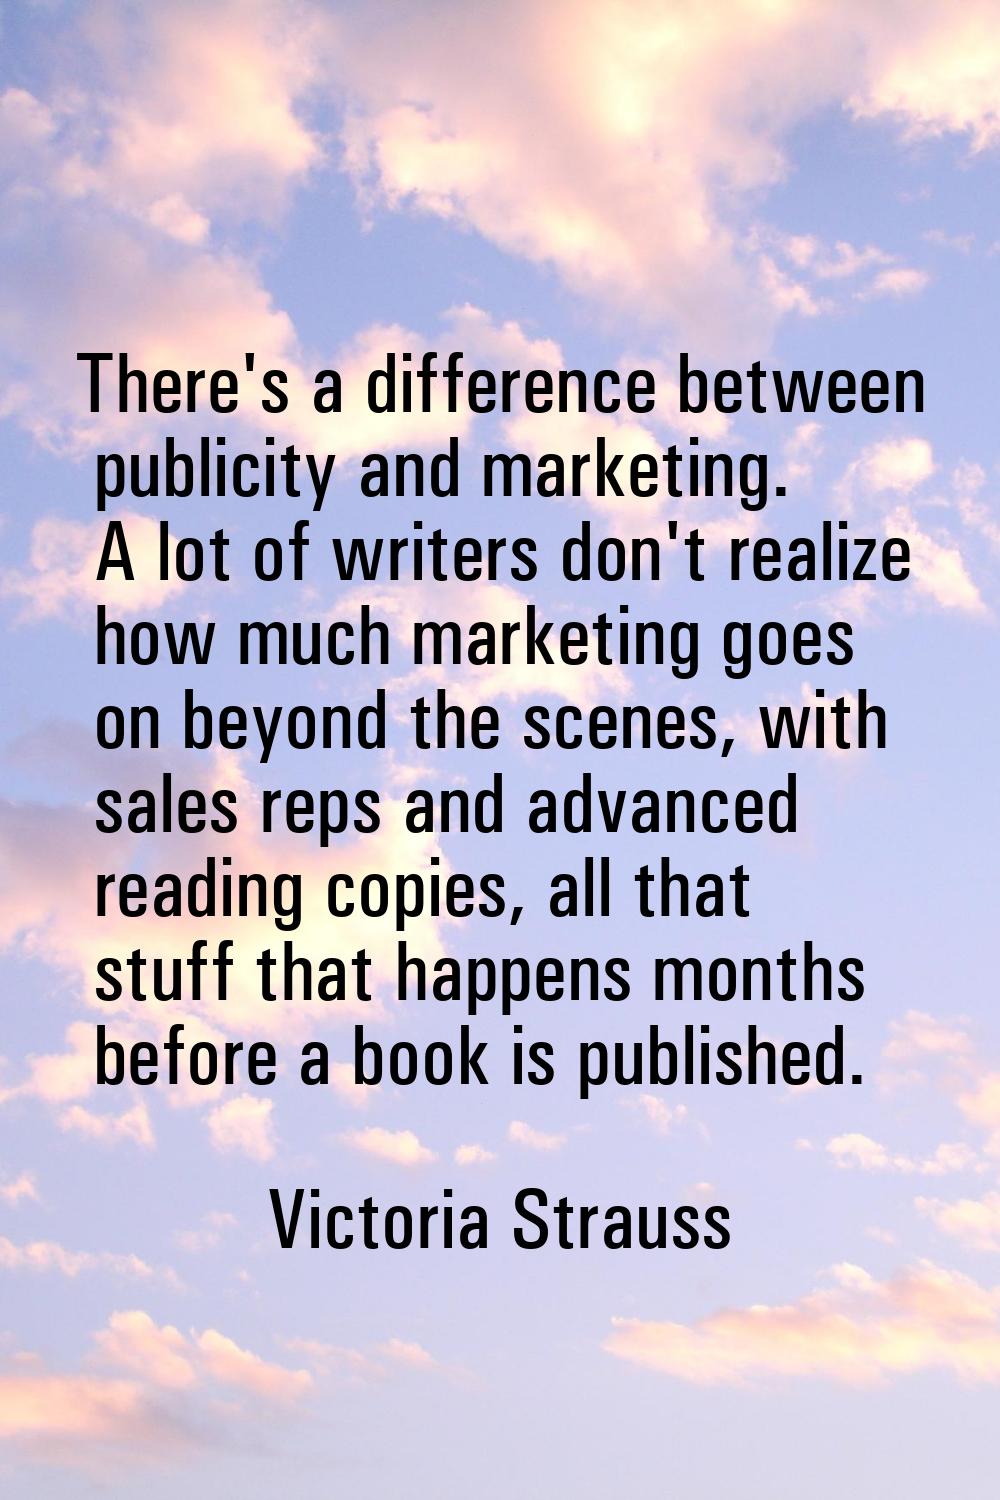 There's a difference between publicity and marketing. A lot of writers don't realize how much marke